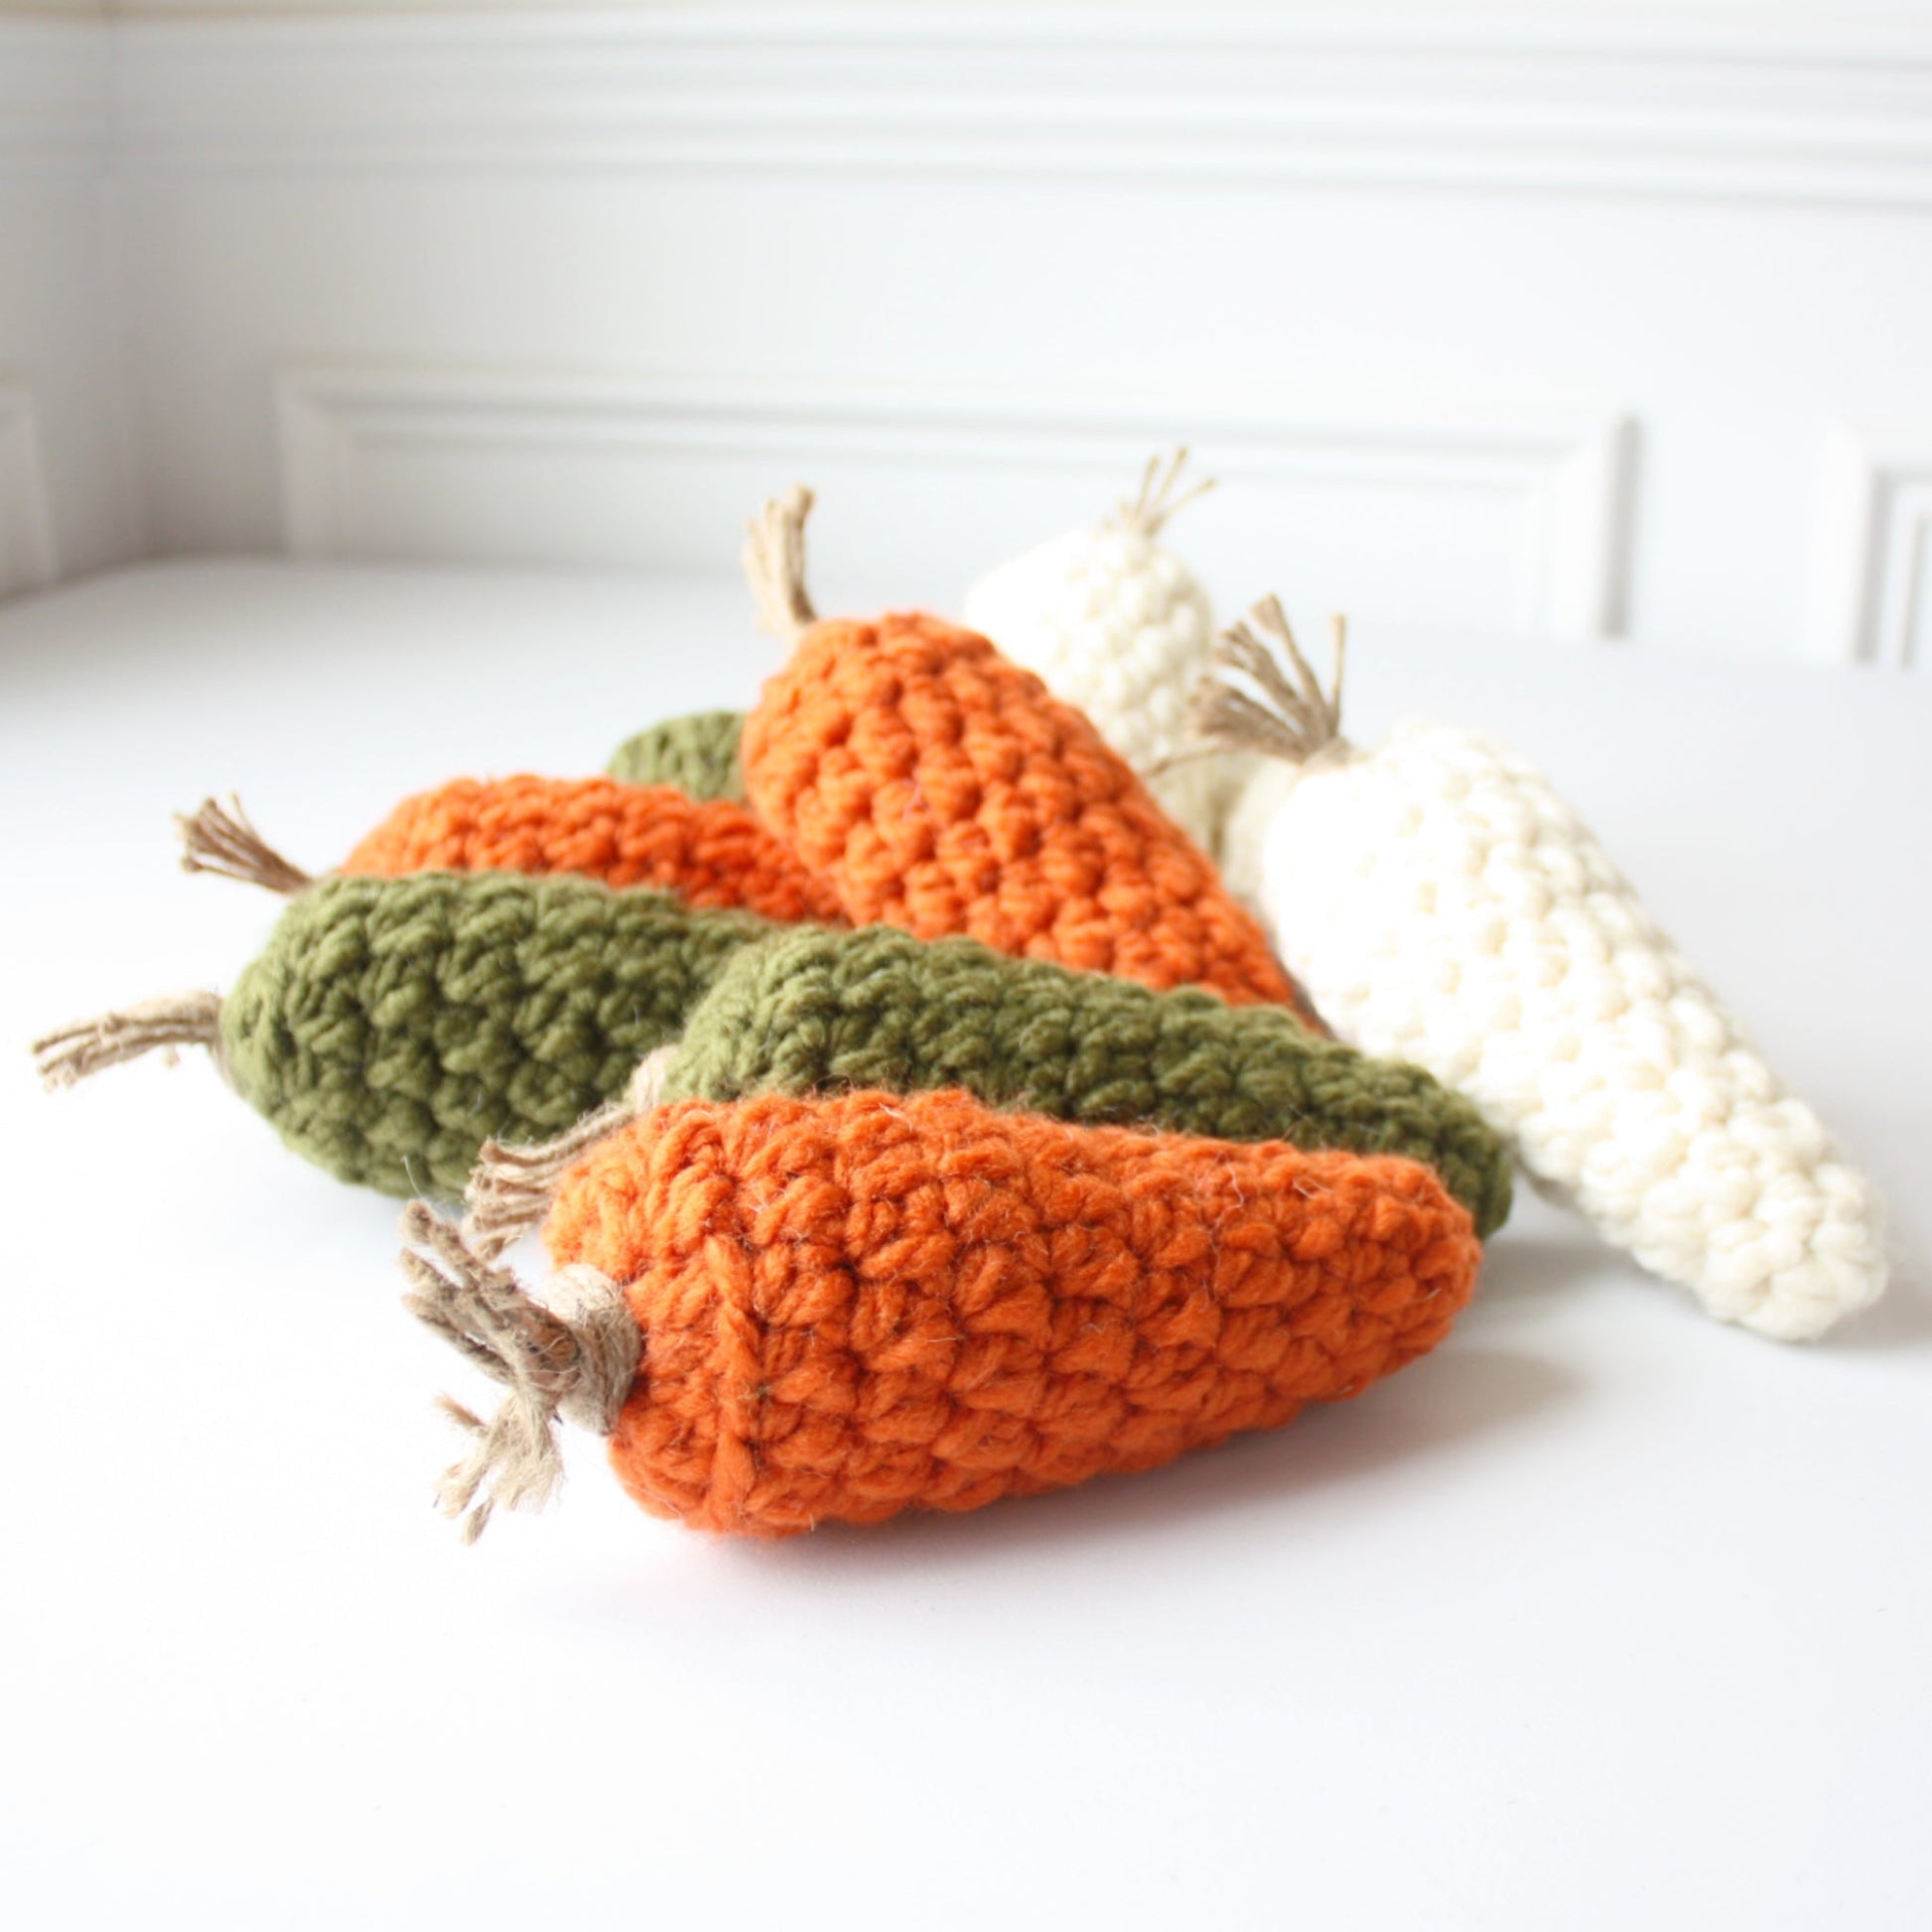 Crocheted Carrots - Made in the USA